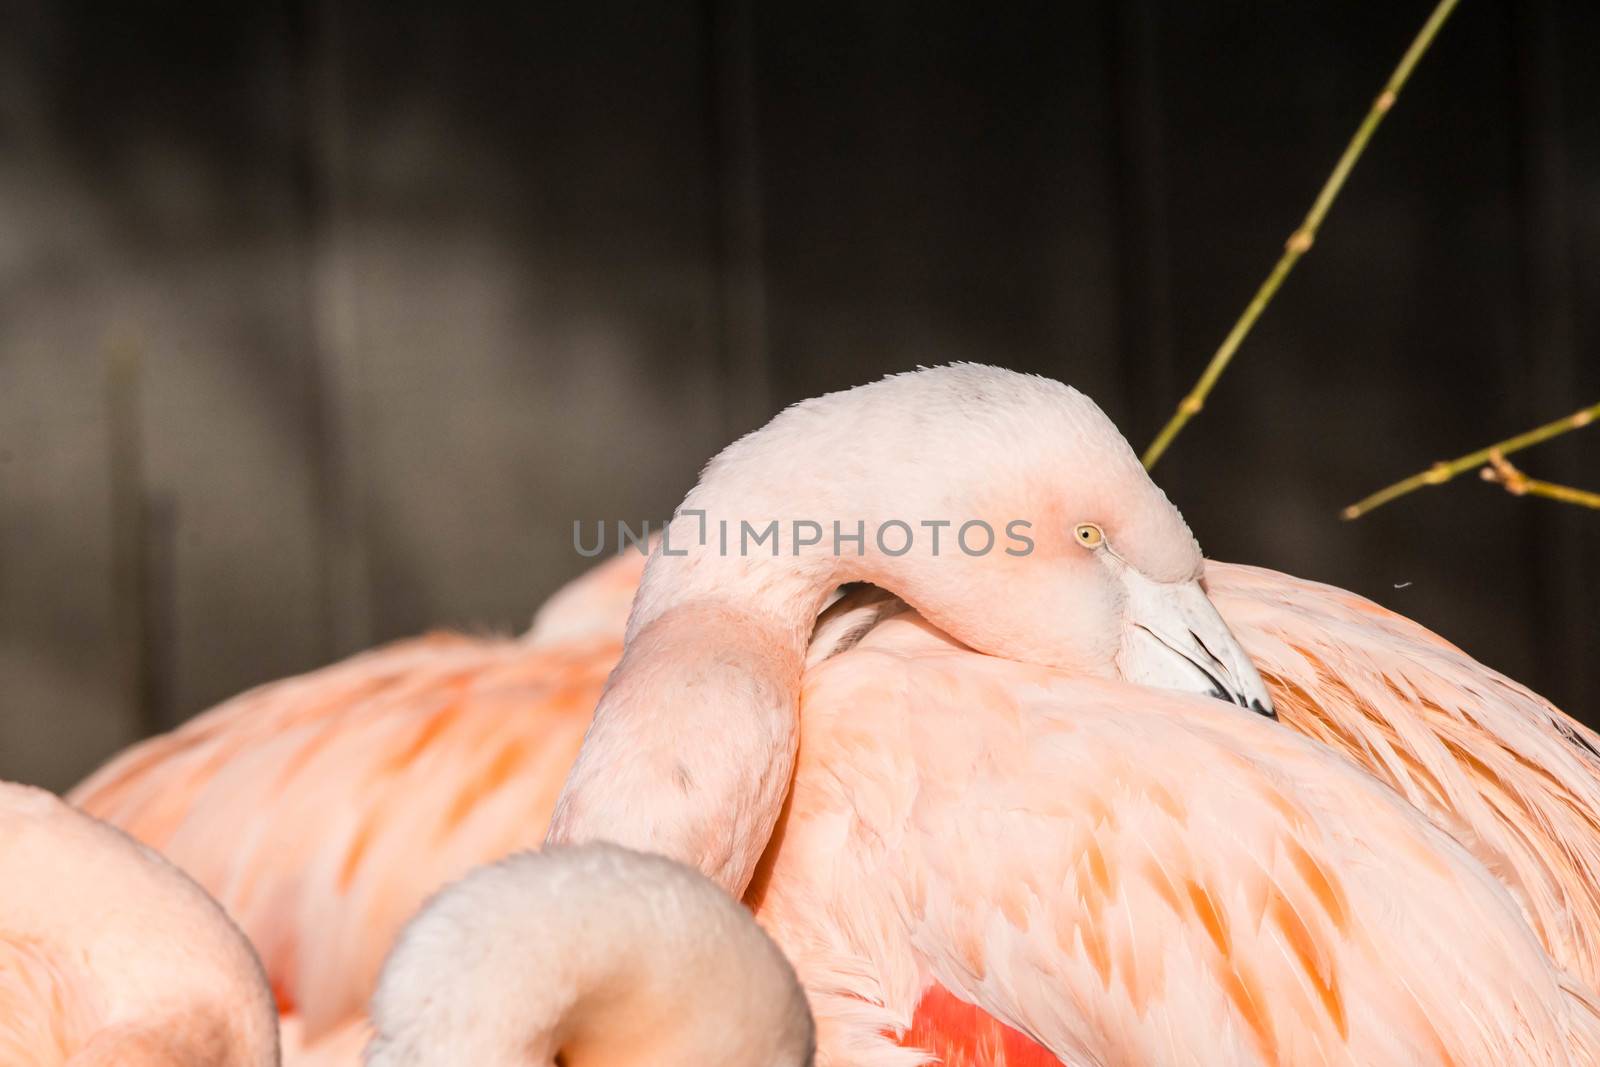 Three flamingos' necks and one head shown with beaks in feathers.